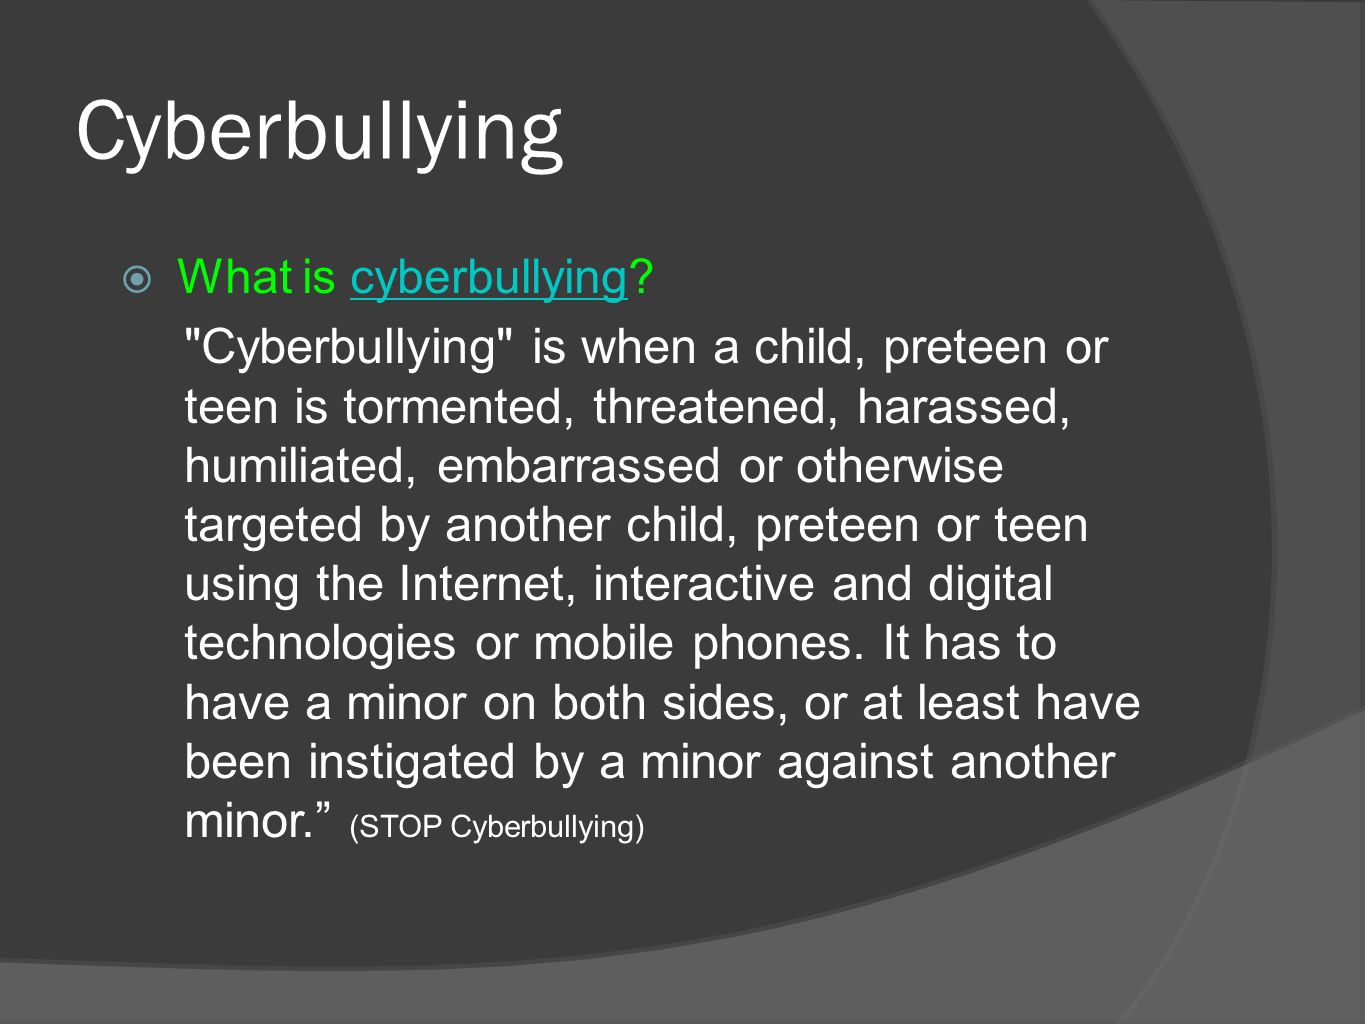 Cyberbullying  What is cyberbullying cyberbullying Cyberbullying is when a child, preteen or teen is tormented, threatened, harassed, humiliated, embarrassed or otherwise targeted by another child, preteen or teen using the Internet, interactive and digital technologies or mobile phones.